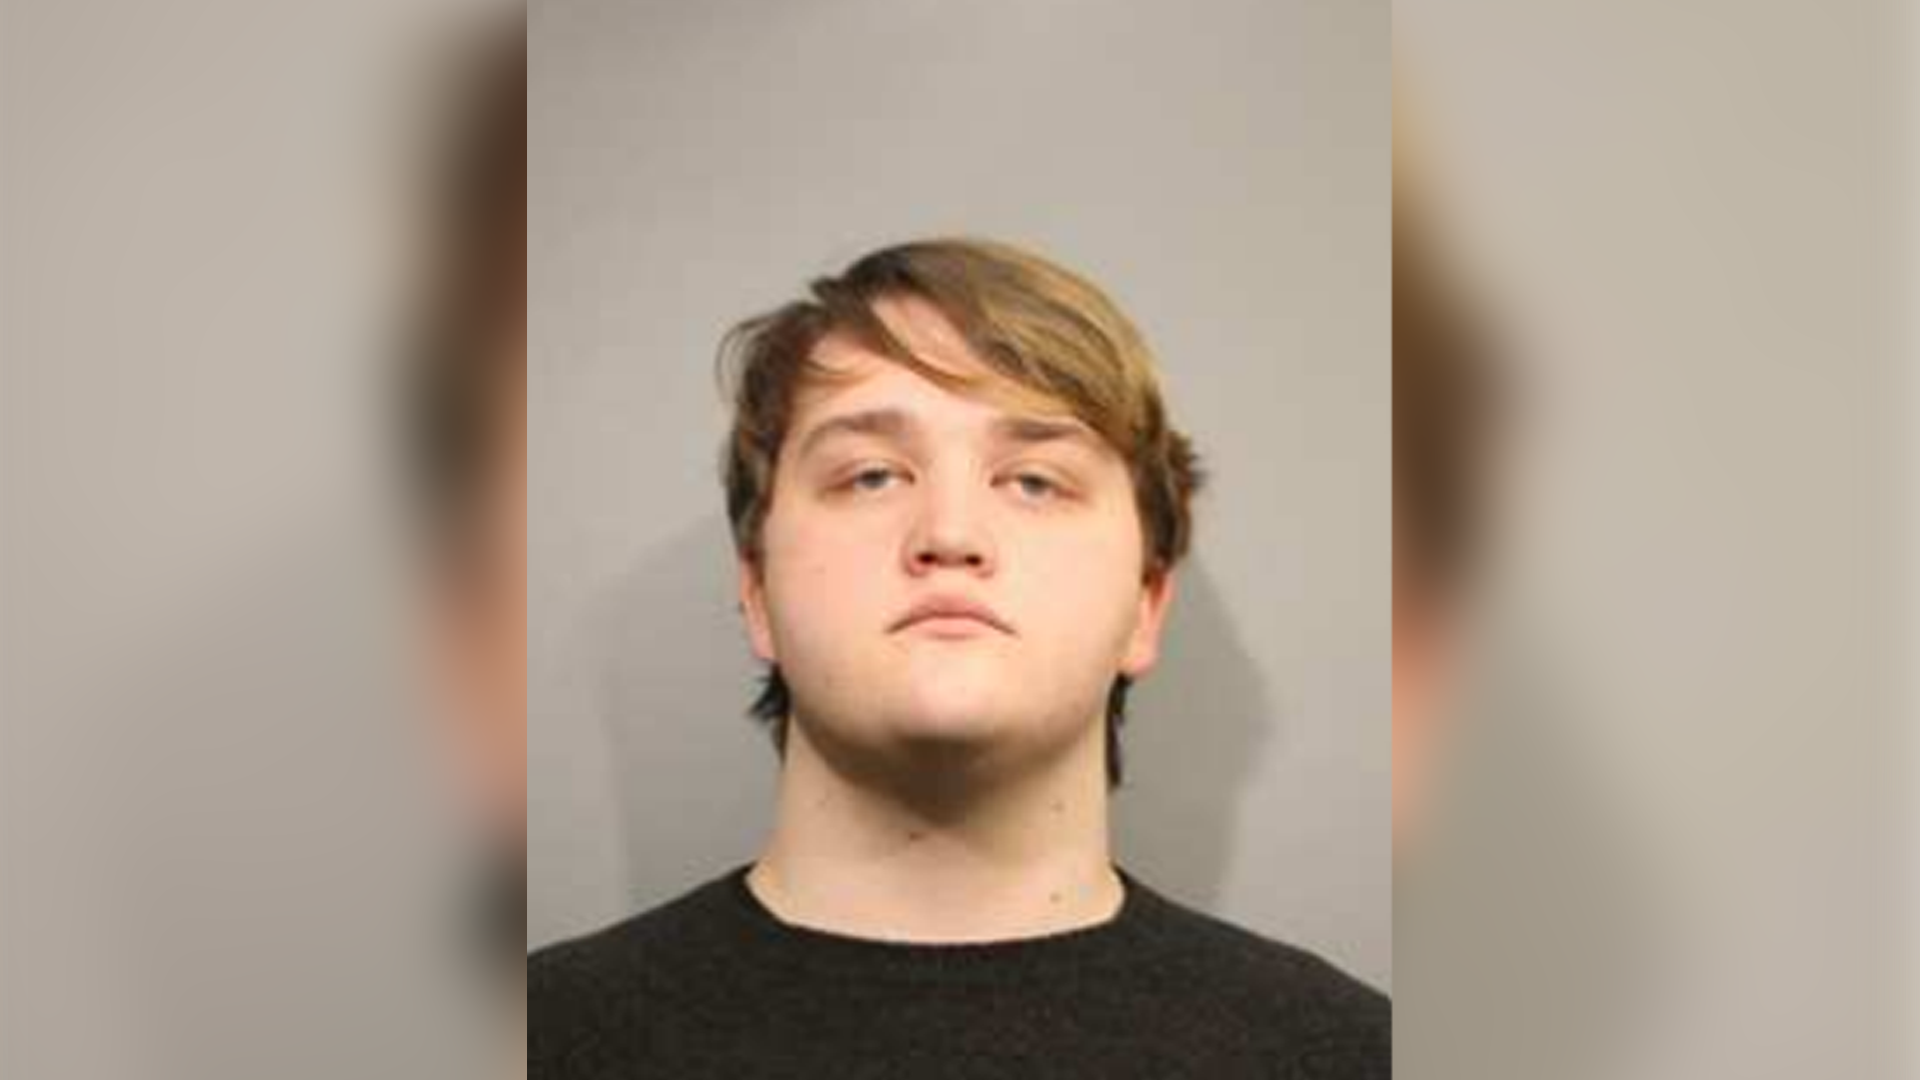 19 Year Com Hd - Police: Wilton 19-year-old arrested for possession of child porn